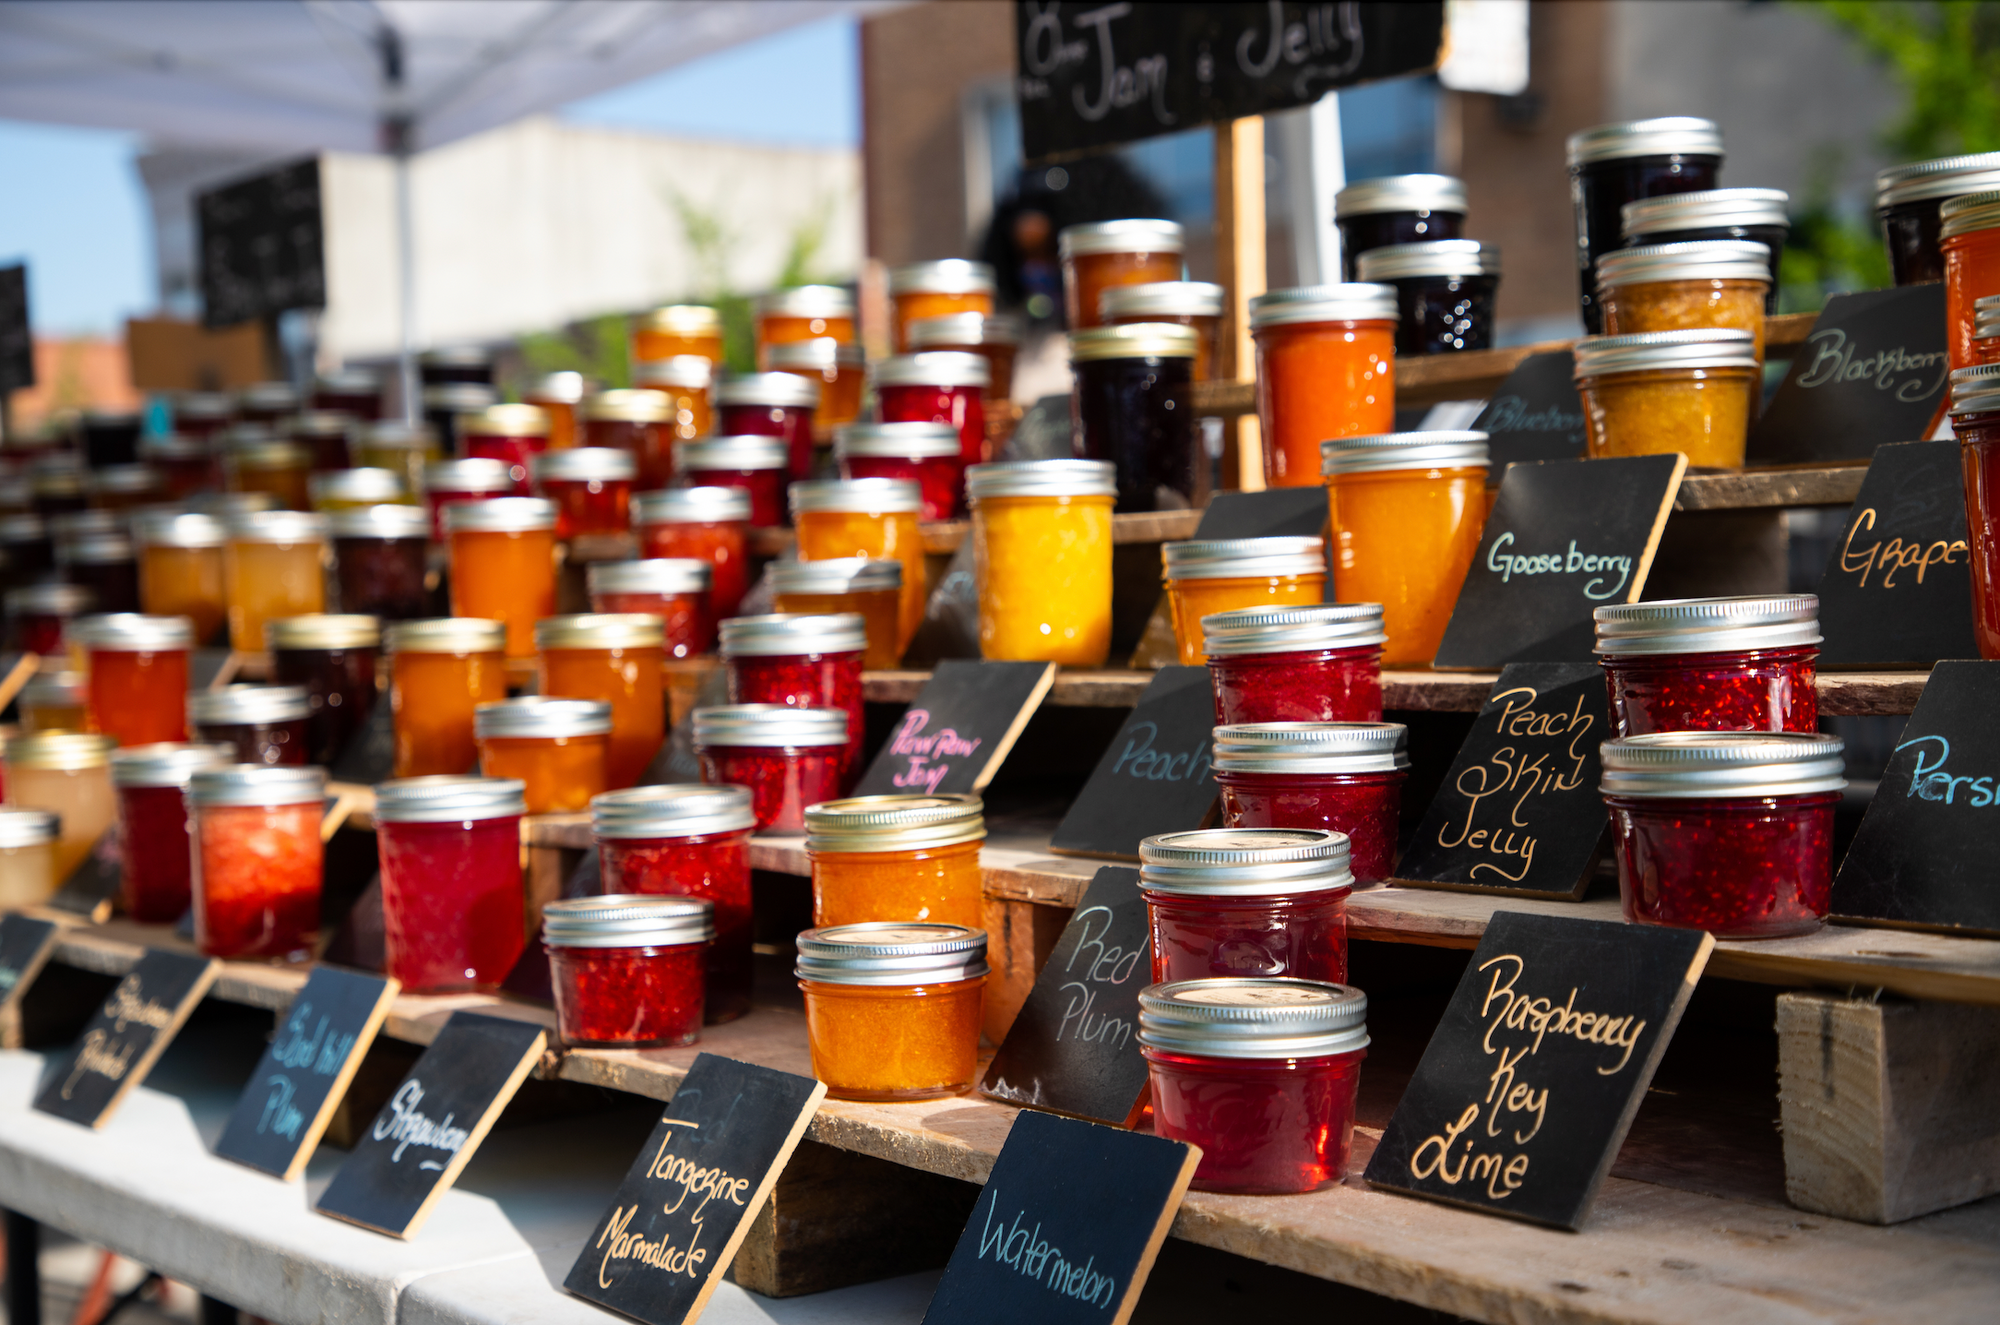 Pepper Jelly: From Farm Stand to Gourmet Shops